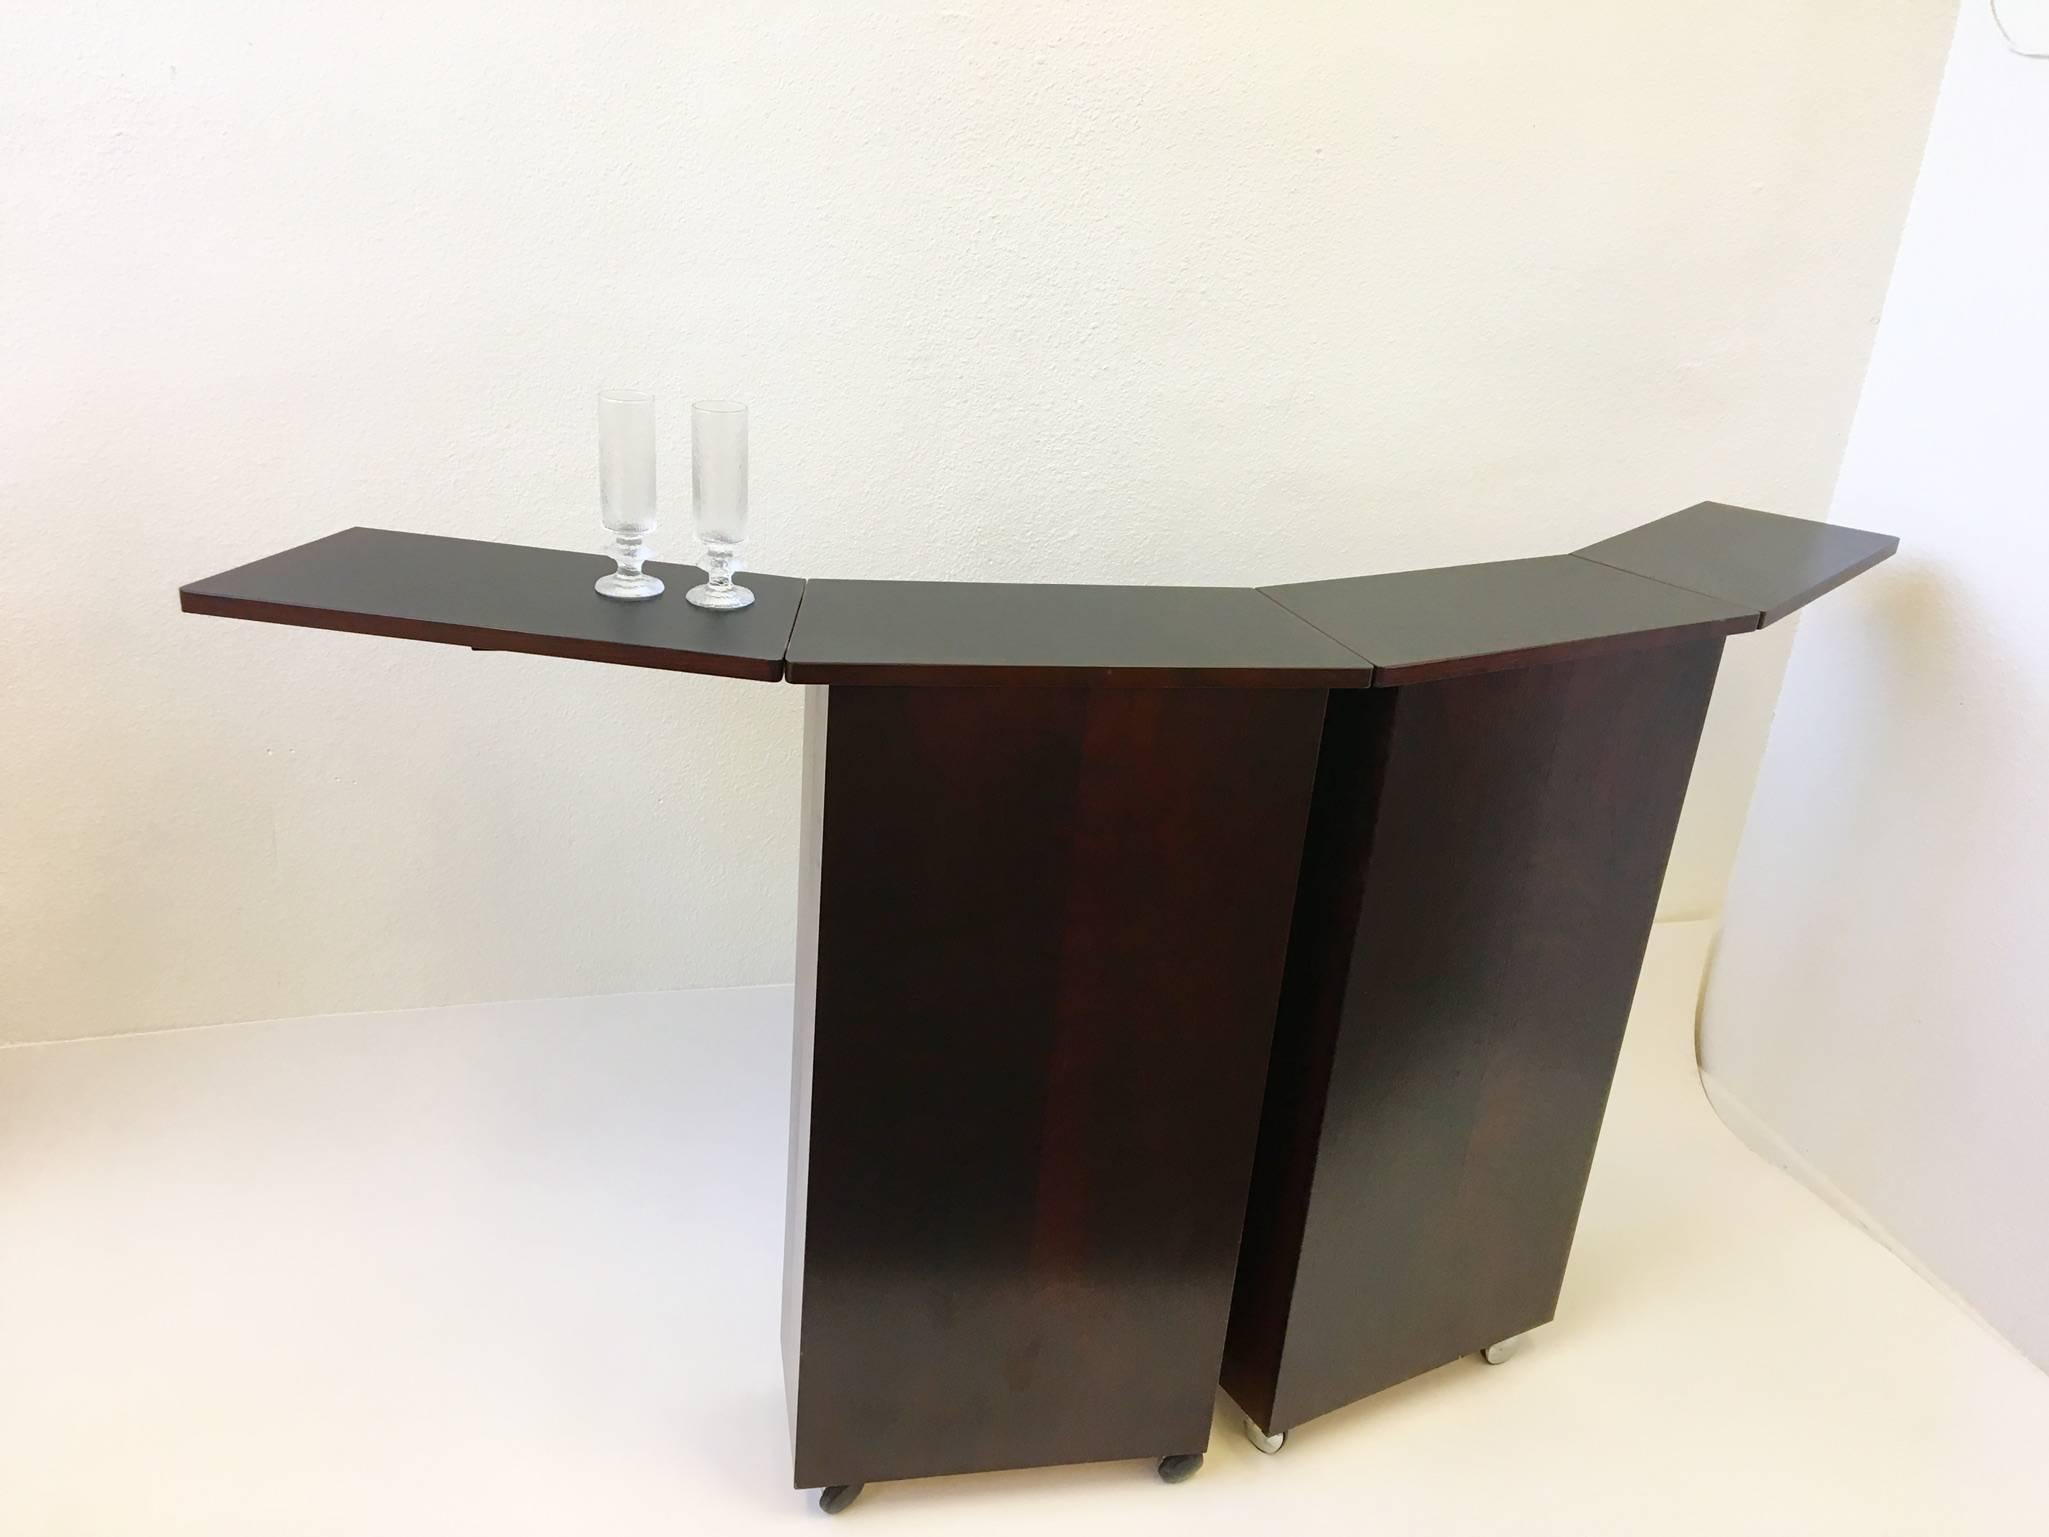 An amazing 1970s Danish rosewood folding portable bar by Danish designer Niels Erik Glasdam Jensen for Vantinge Møbelindustri. The bar is very elegant when opened and when closed up since it's all rosewood. The top is black formica when opened